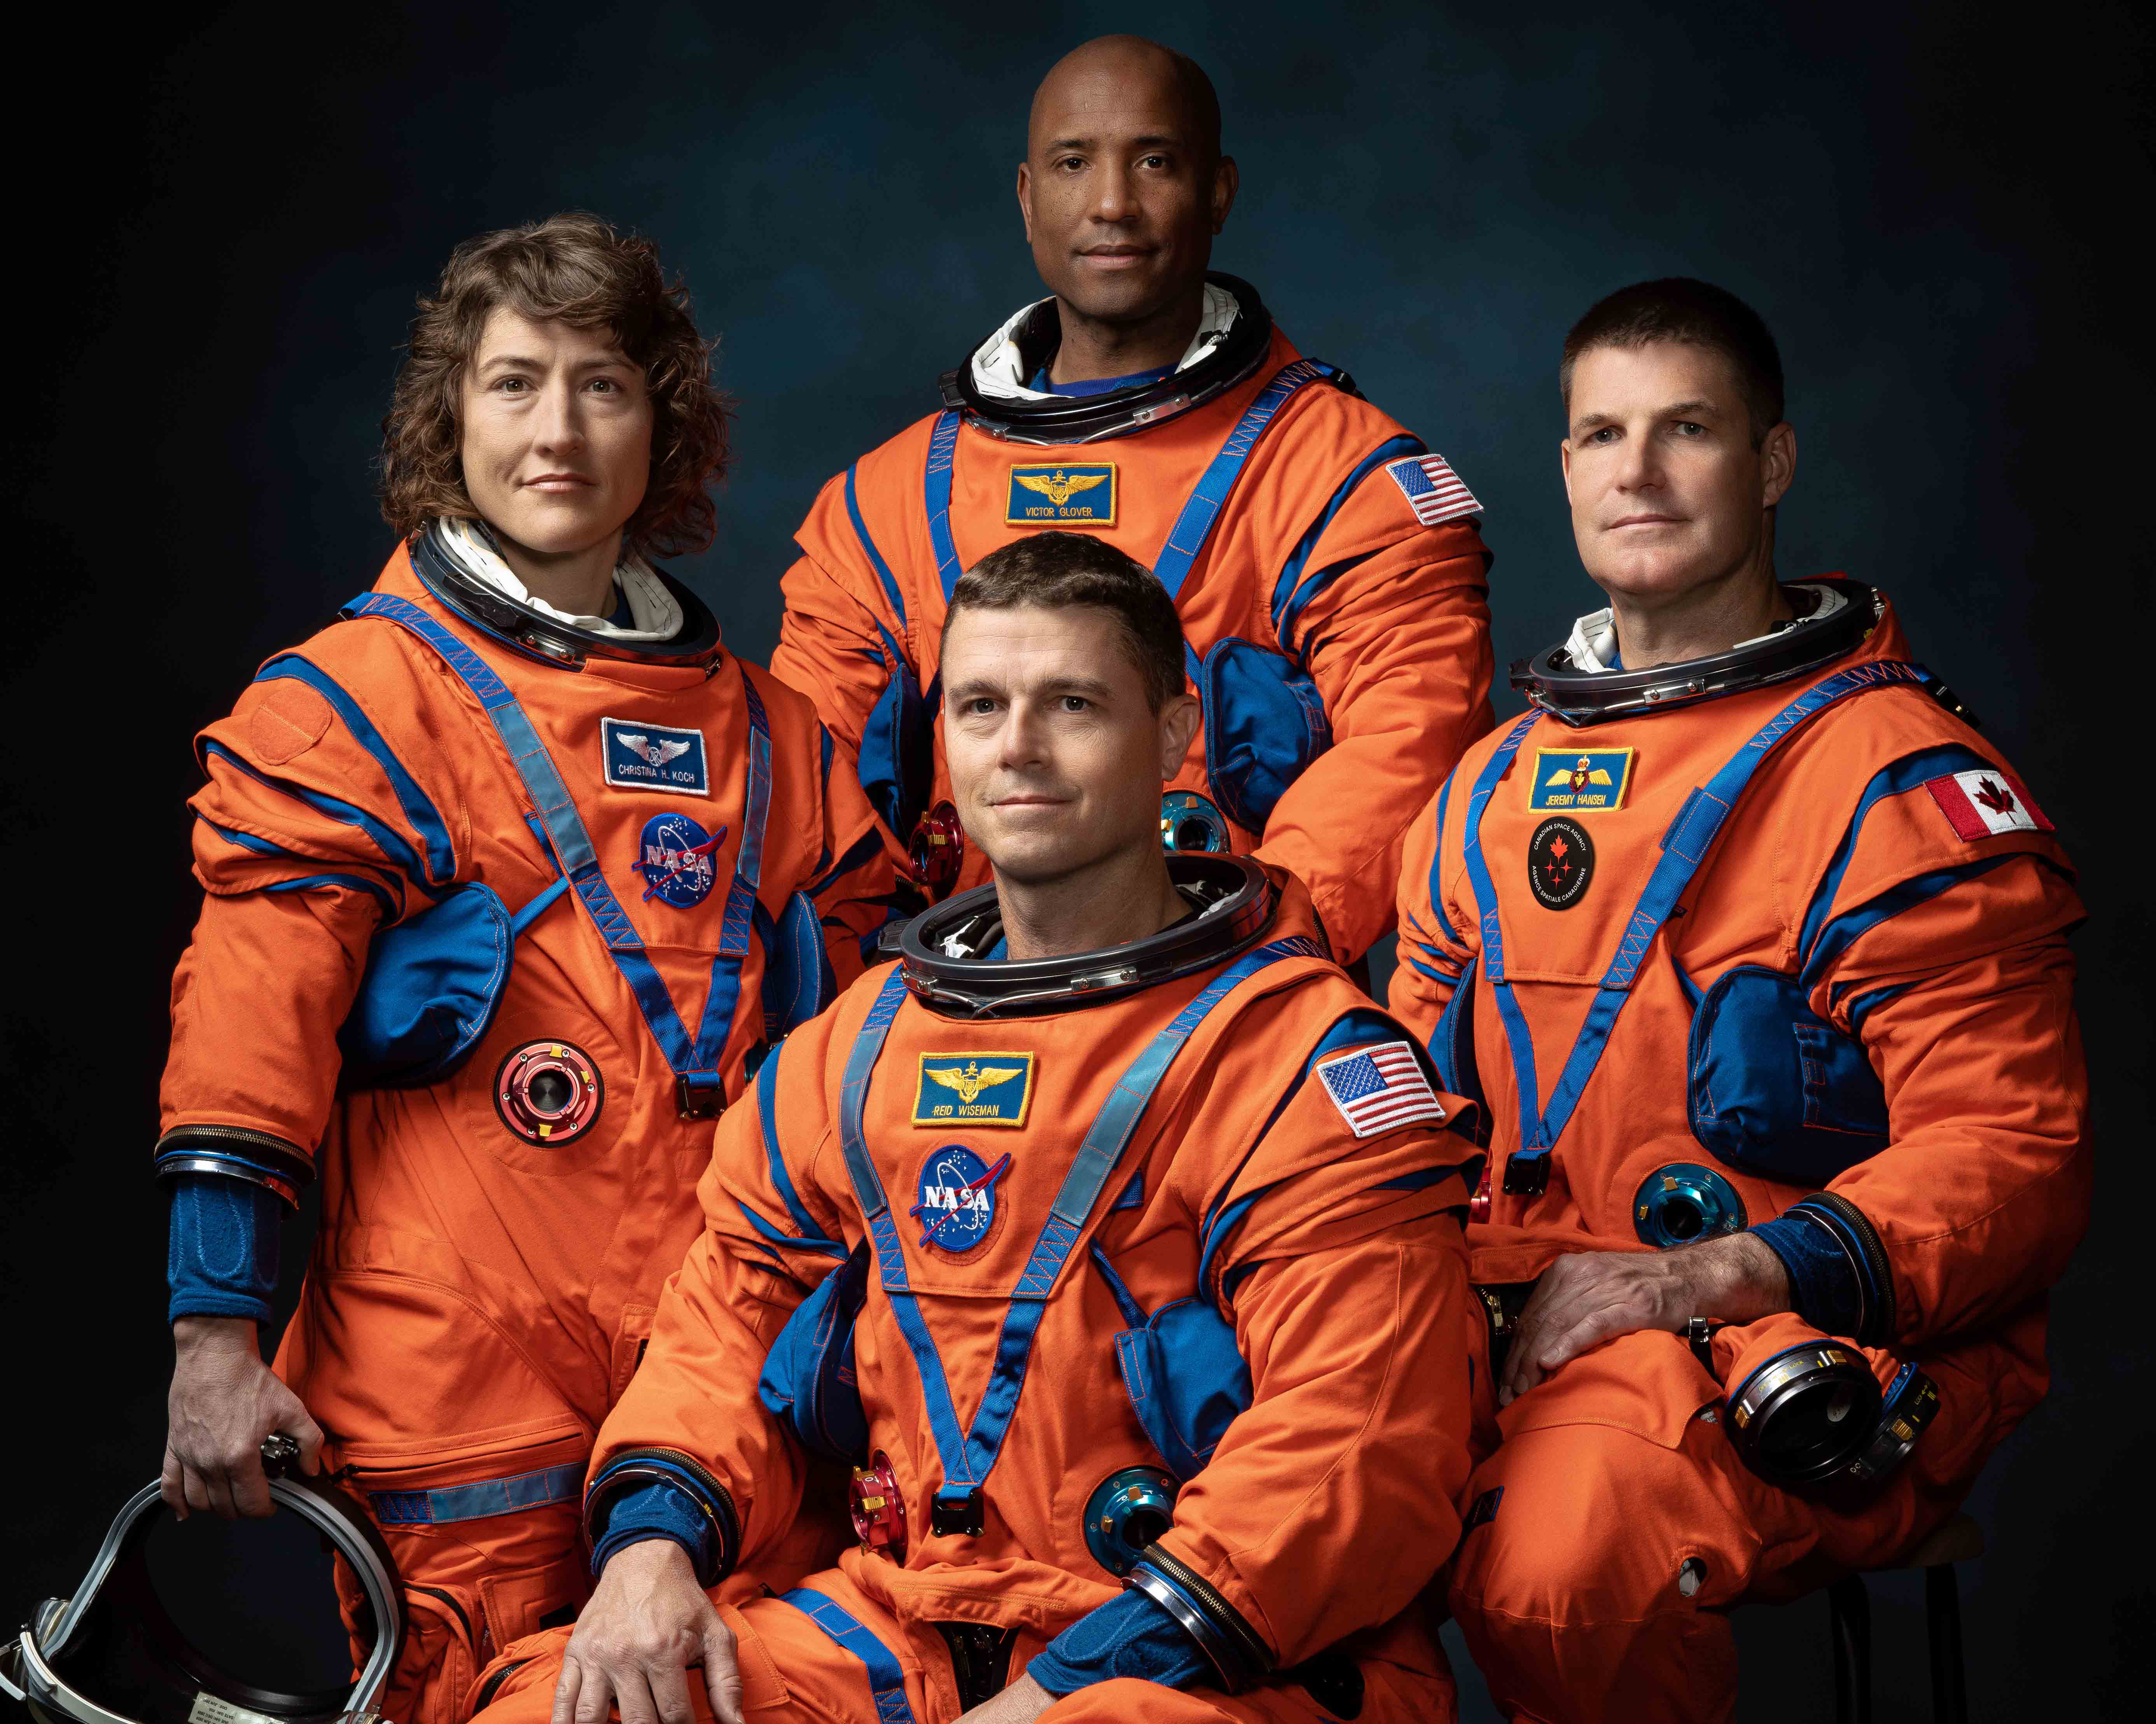 The four-member crew of NASA's Artemis II mission poses for a formal portrait in orange space suits.